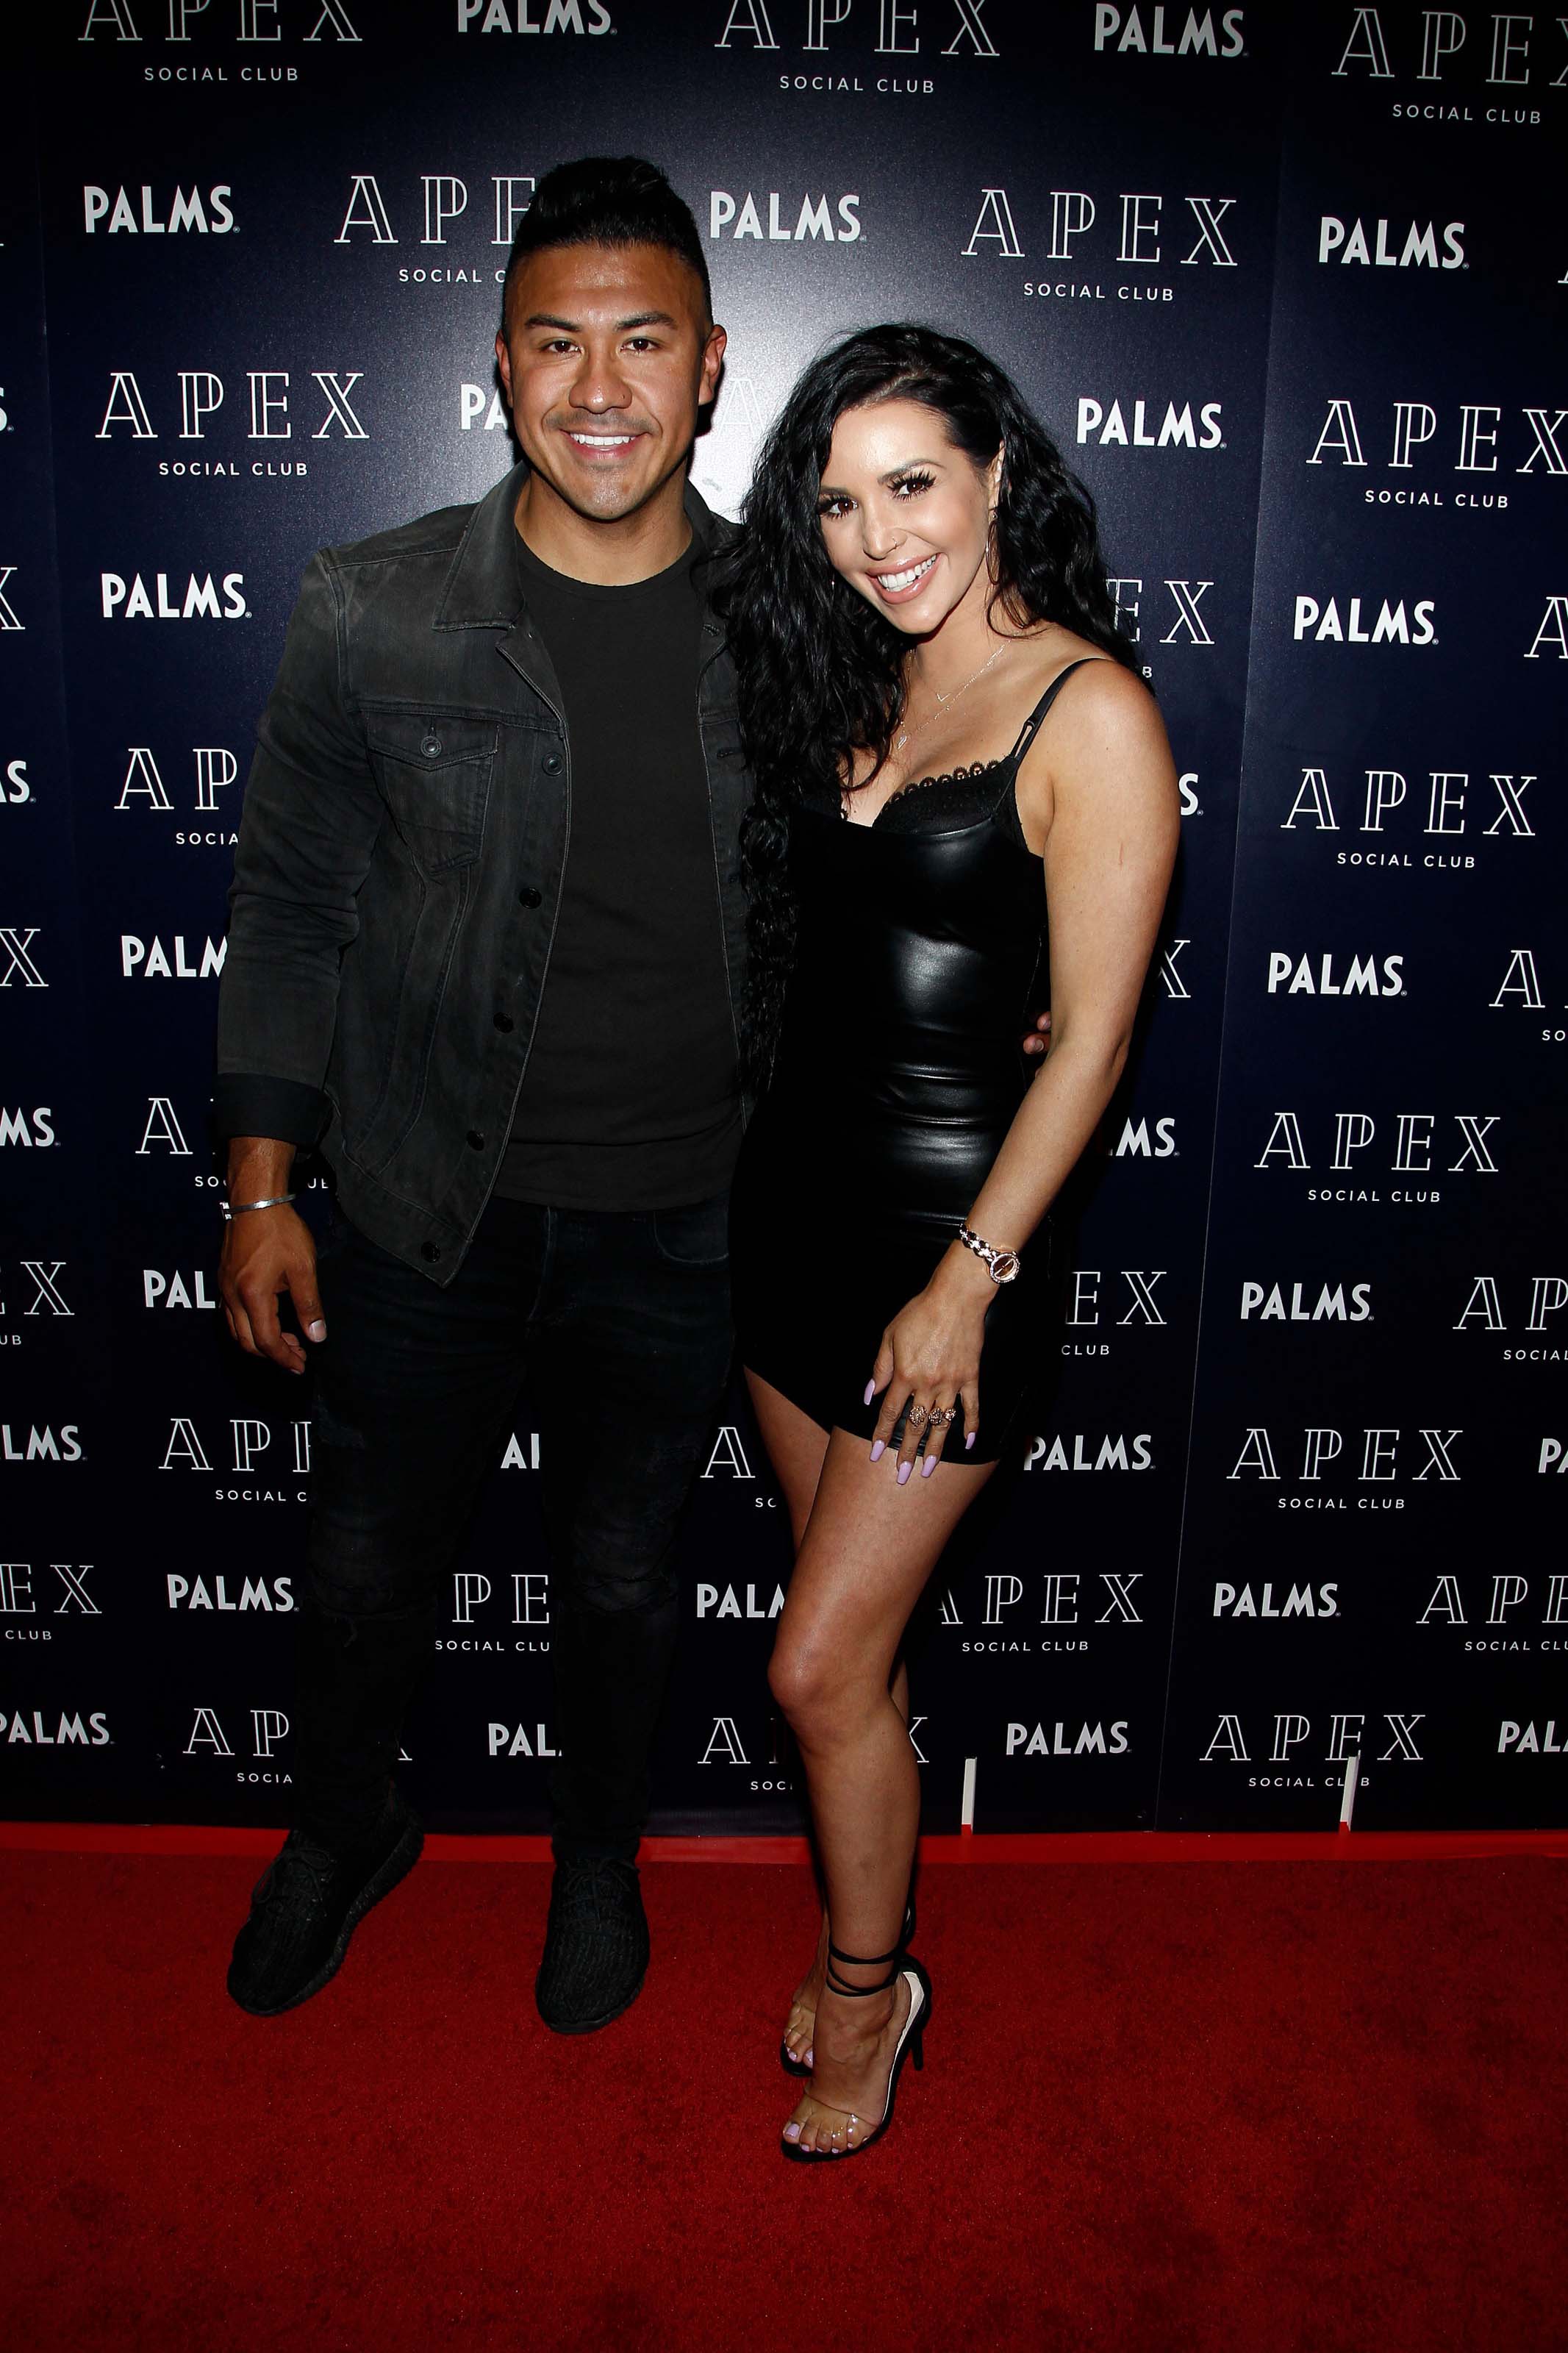 Scheana Marie attends Opening of Clique Hospitality’s APEX Social Club